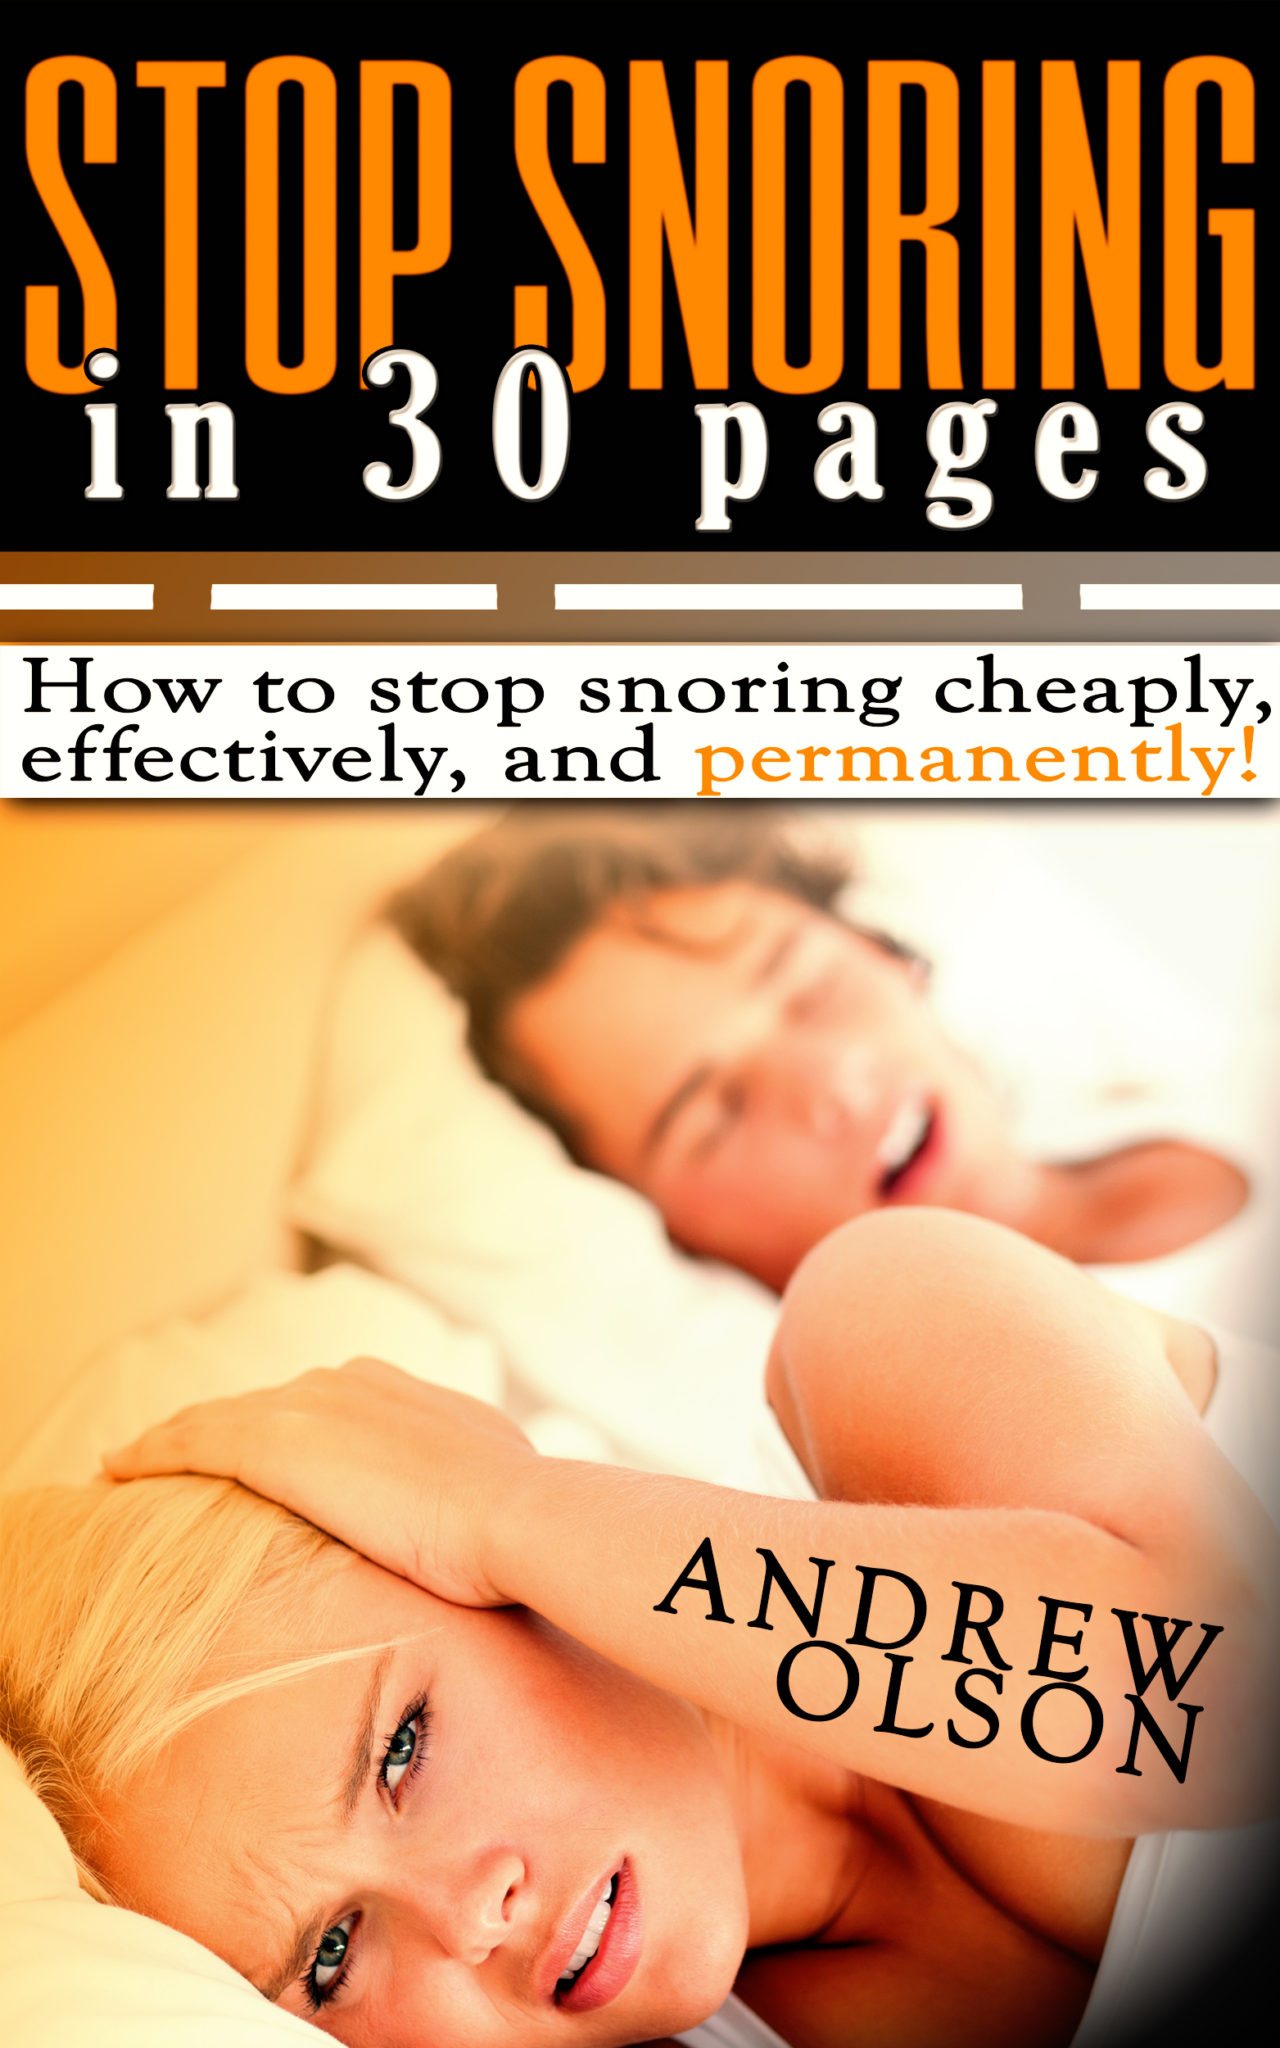 Stop Snoring In 30 pages by Andrew Olson